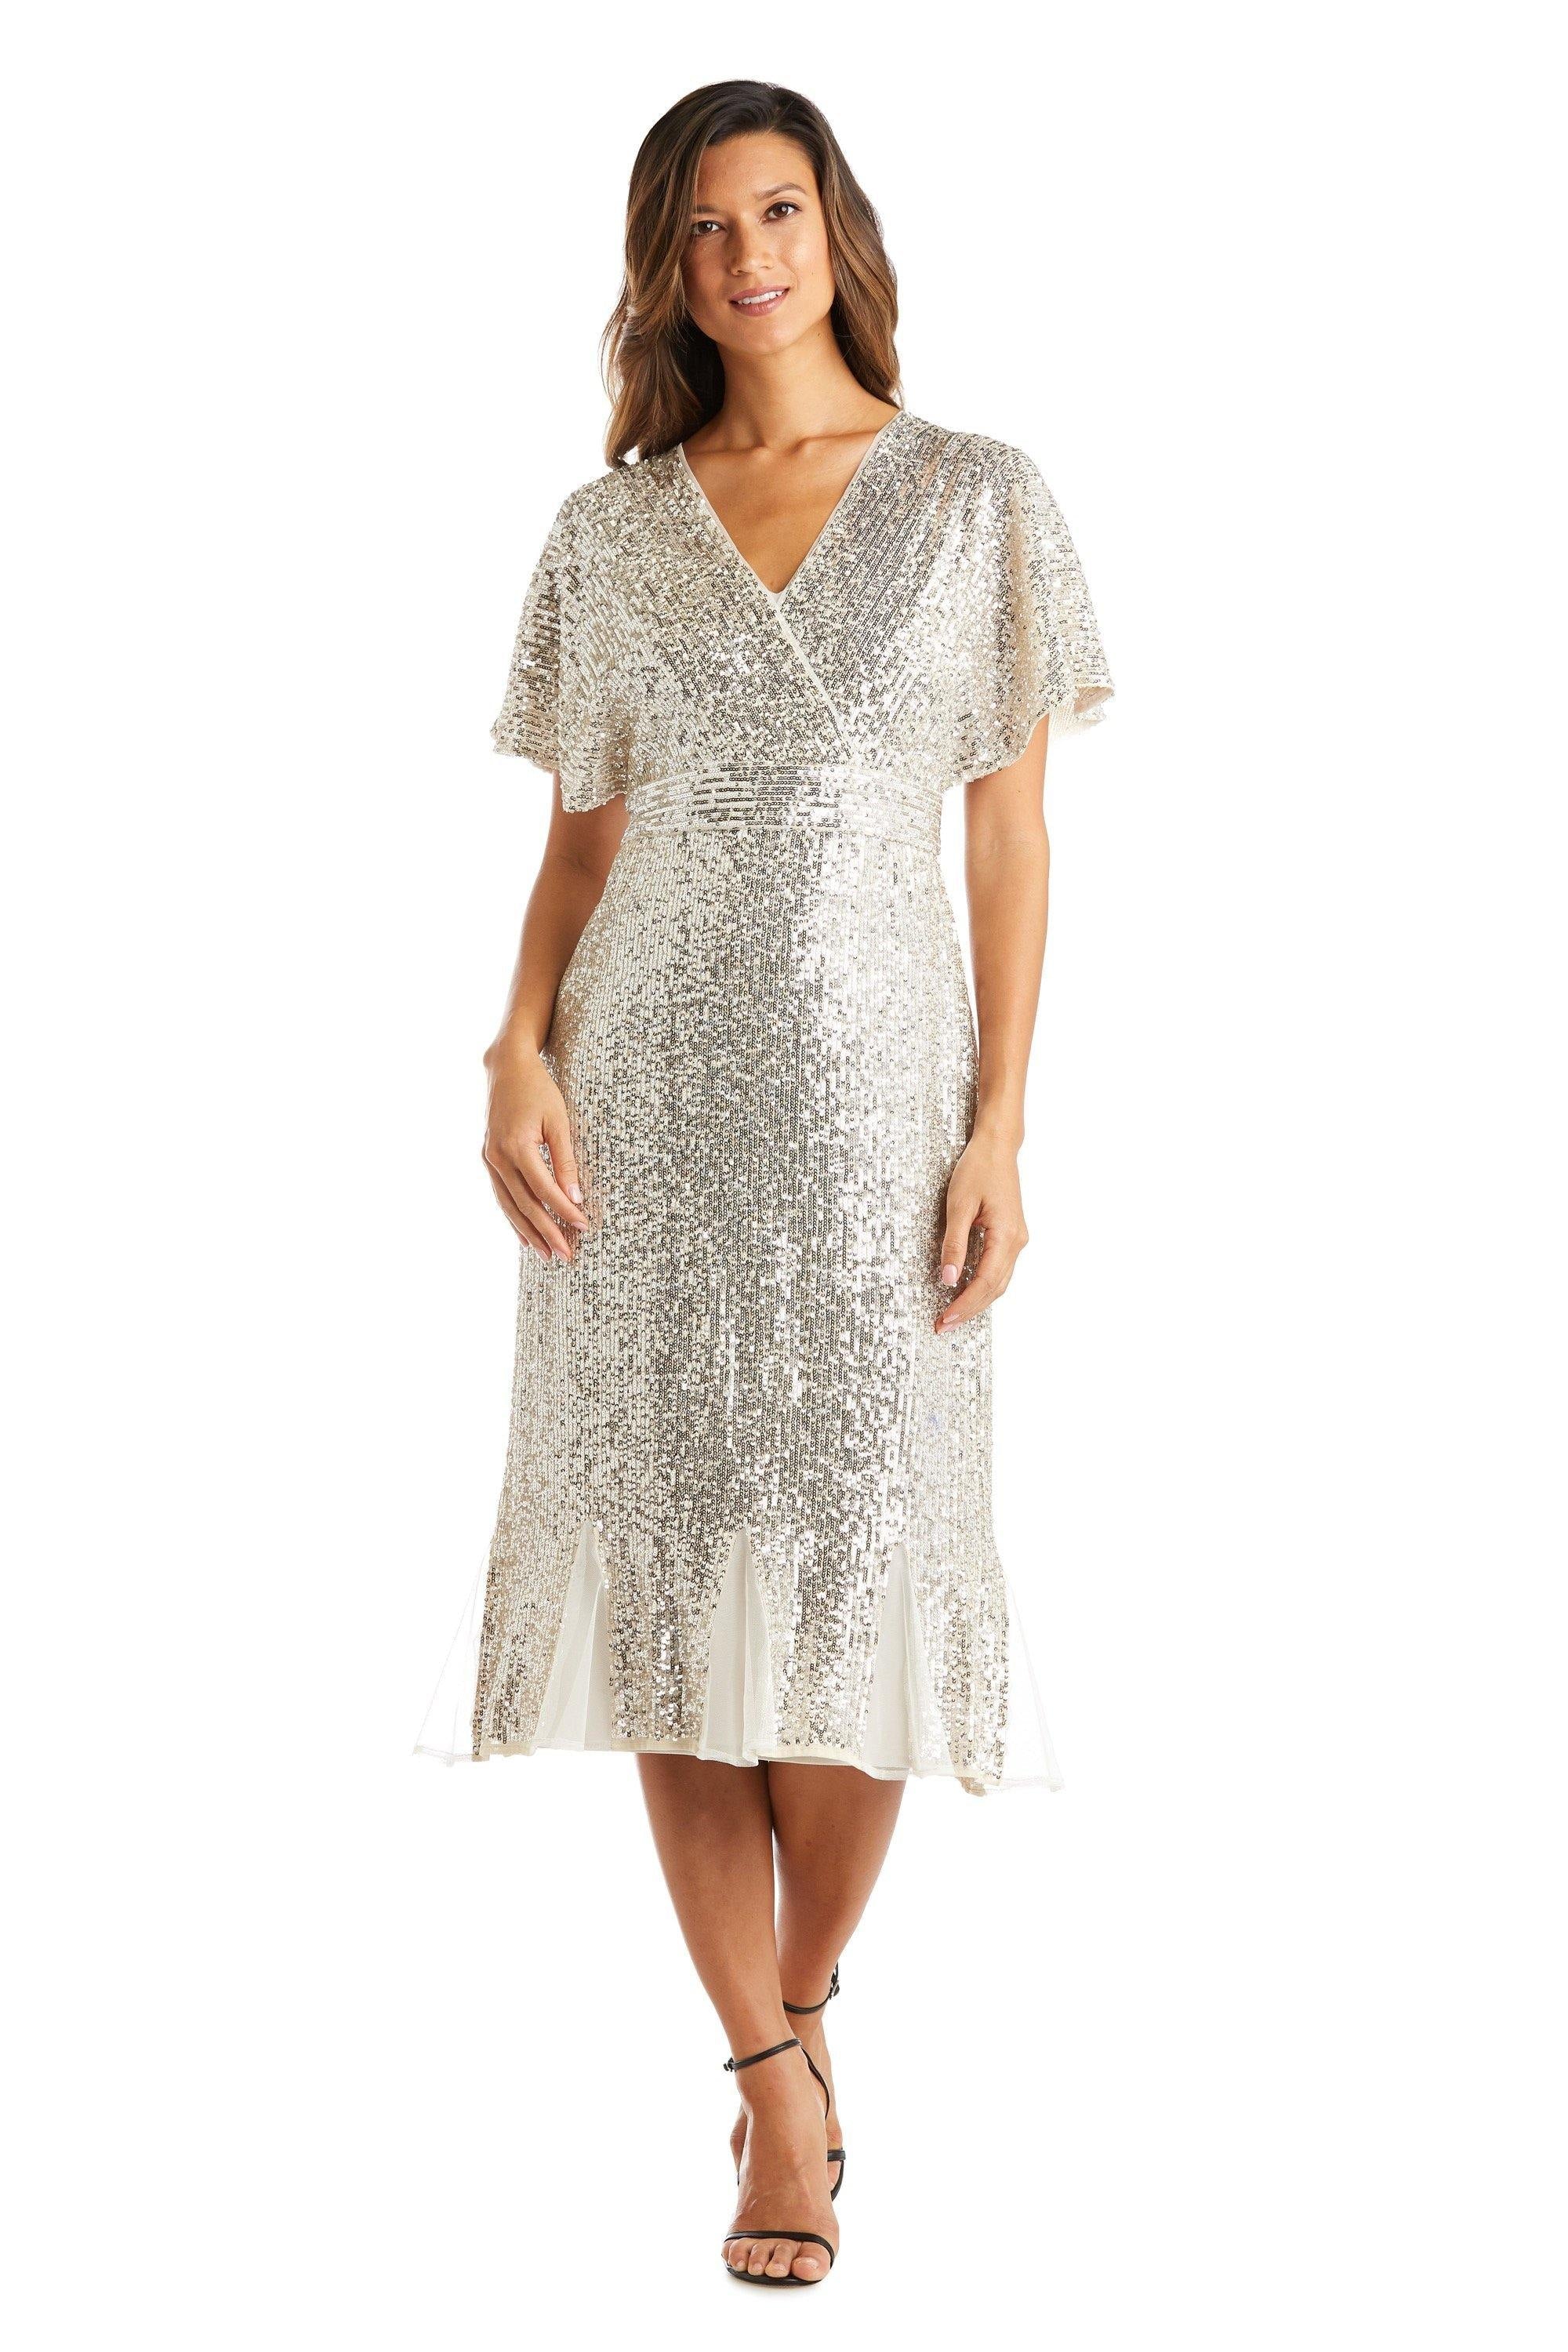 R&M Richards Mother of the Bride Sequin Dress 5922 - The Dress Outlet